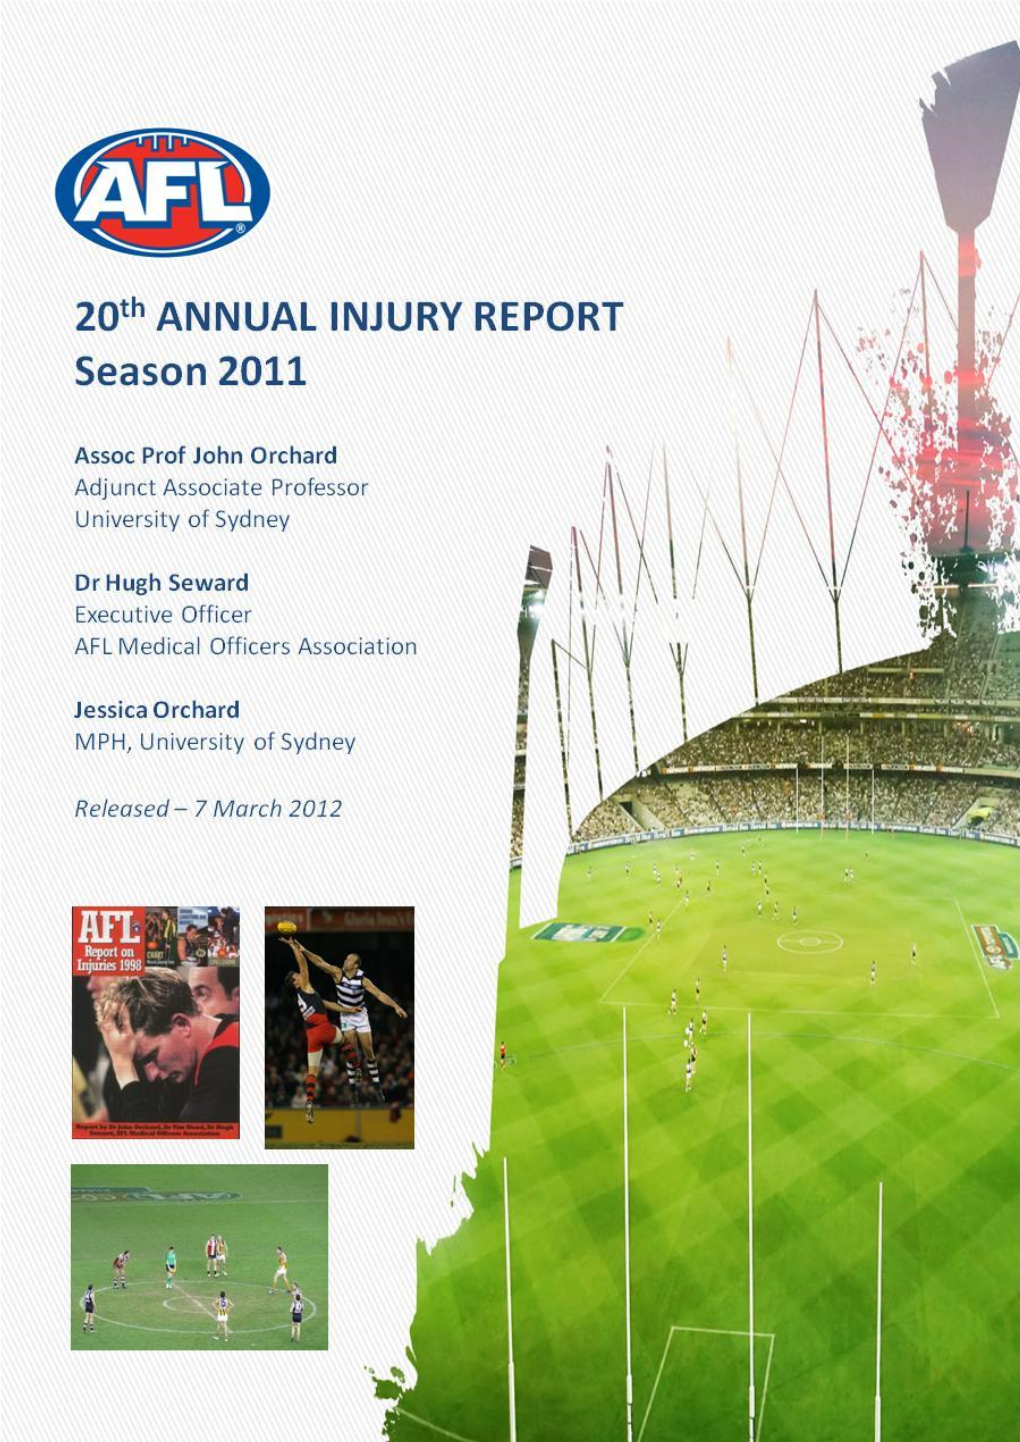 2011 AFL Injury Report Is a Landmark Study, Marking 20 Years of Recording of Injury Data by the AFL